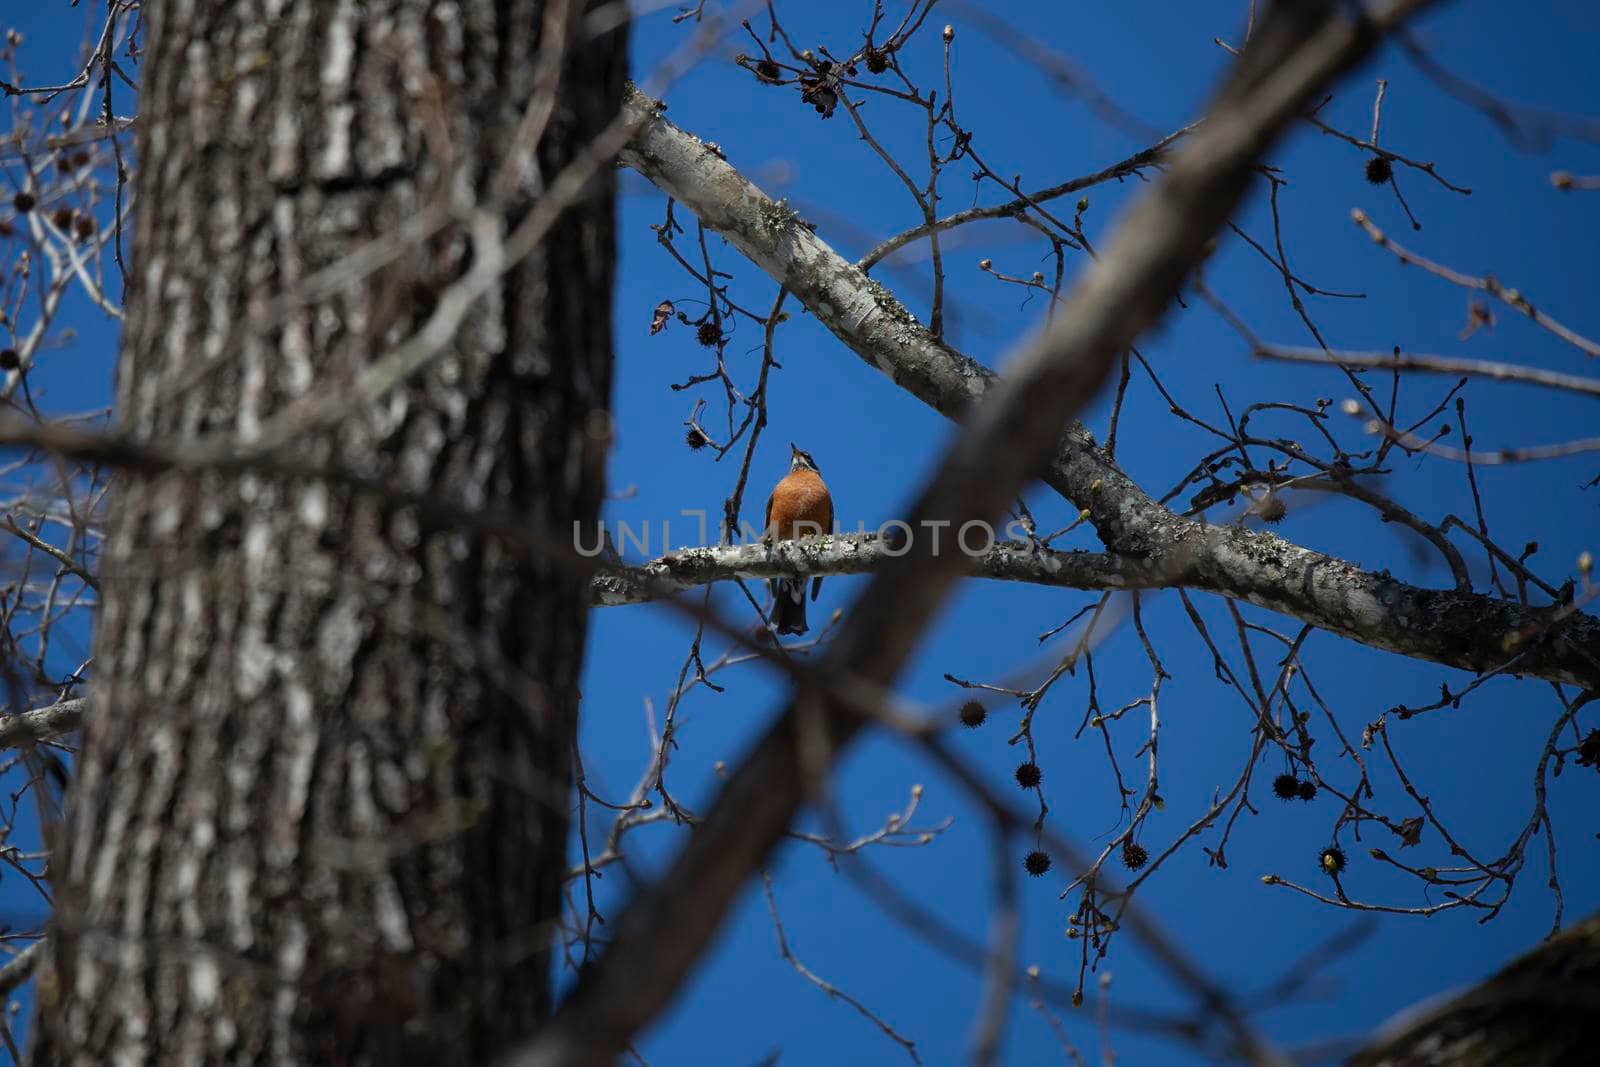 Majestic American robin (Turdus migratorius) looking out from its perch on a tree branch